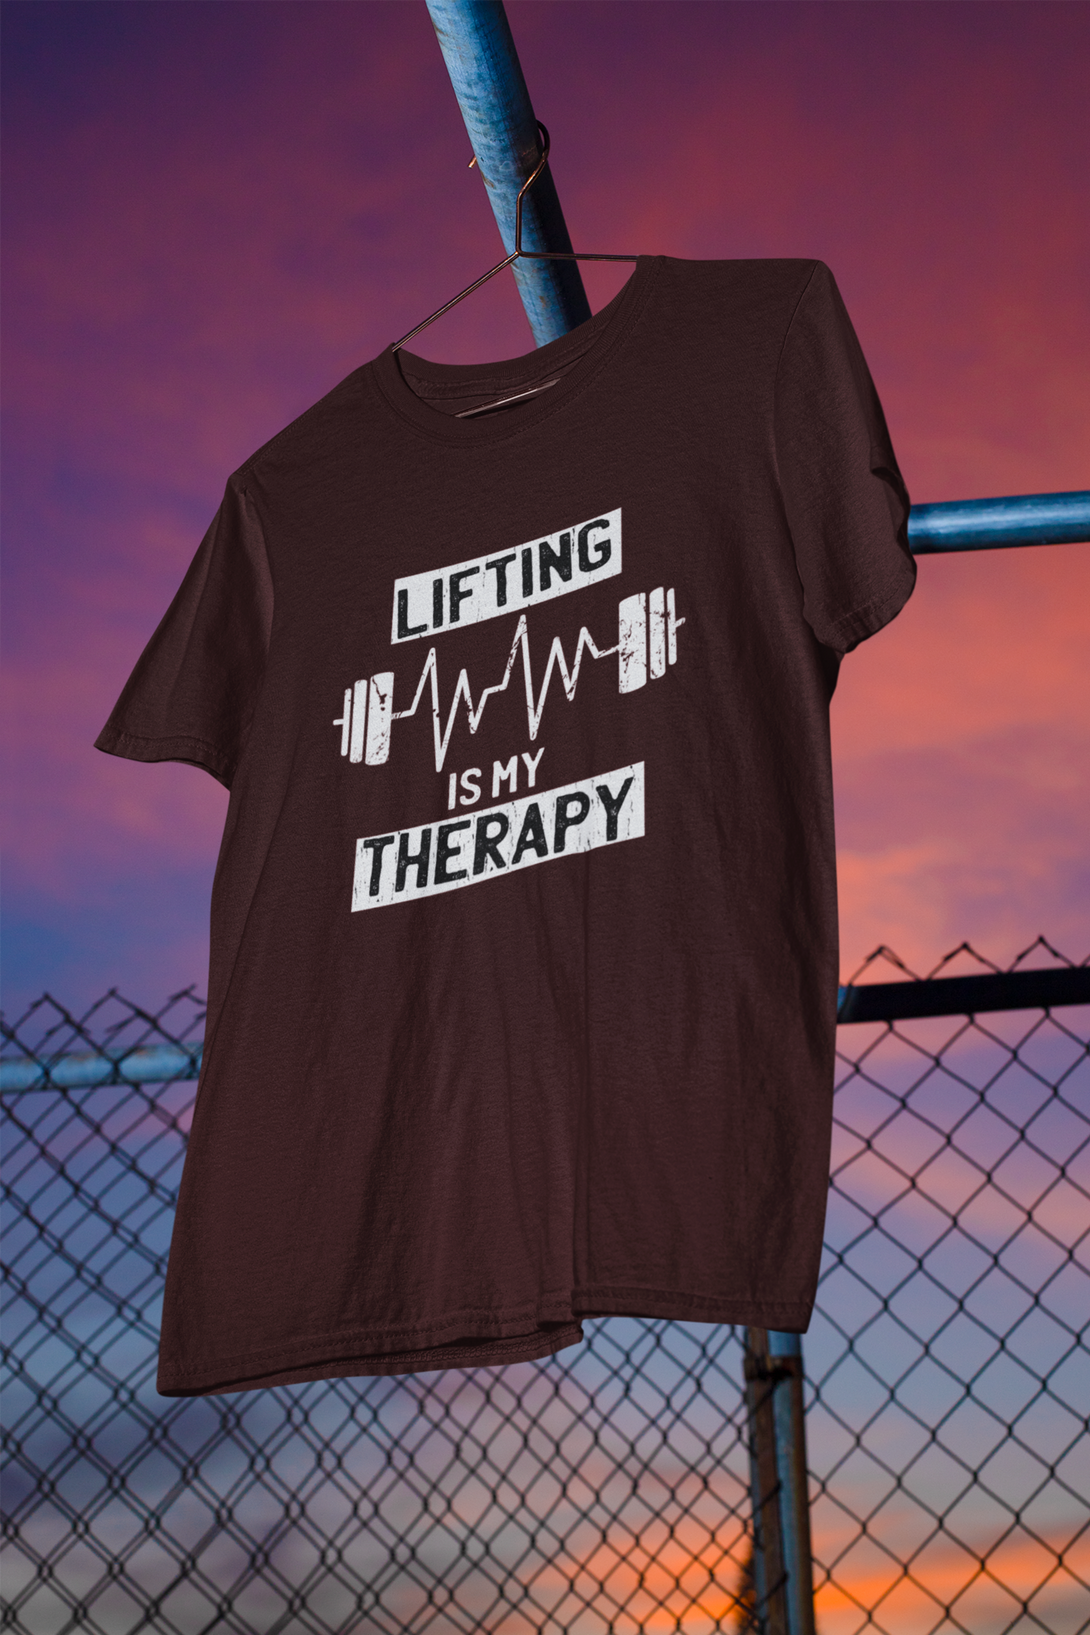 Weightlifting Therapy Printed Oversized T-Shirt For Men - WowWaves - 5